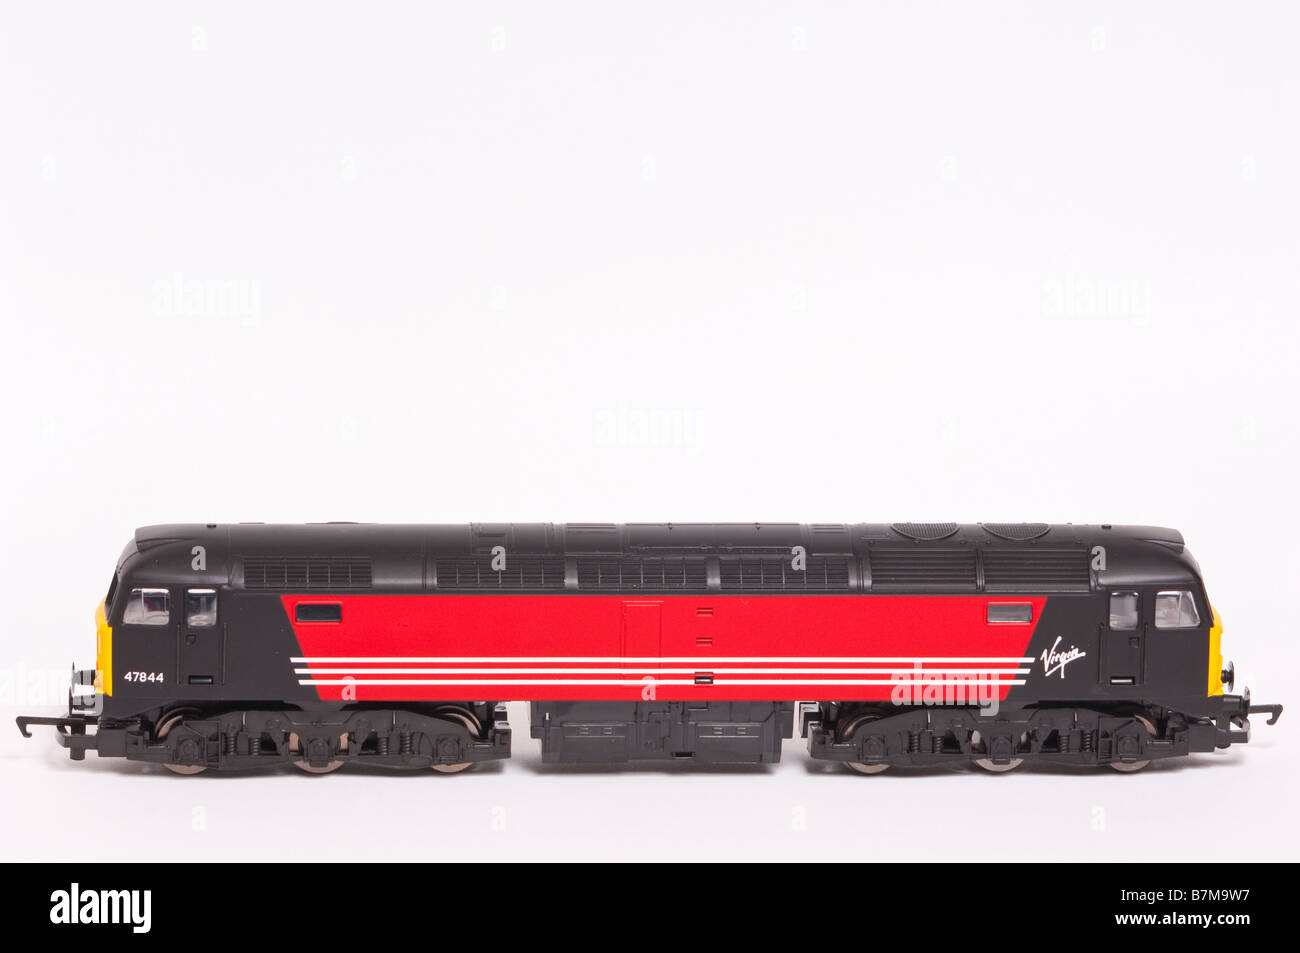 A close up of a Hornby toy model electric diesel train in virgin livery on a white background Stock Photo